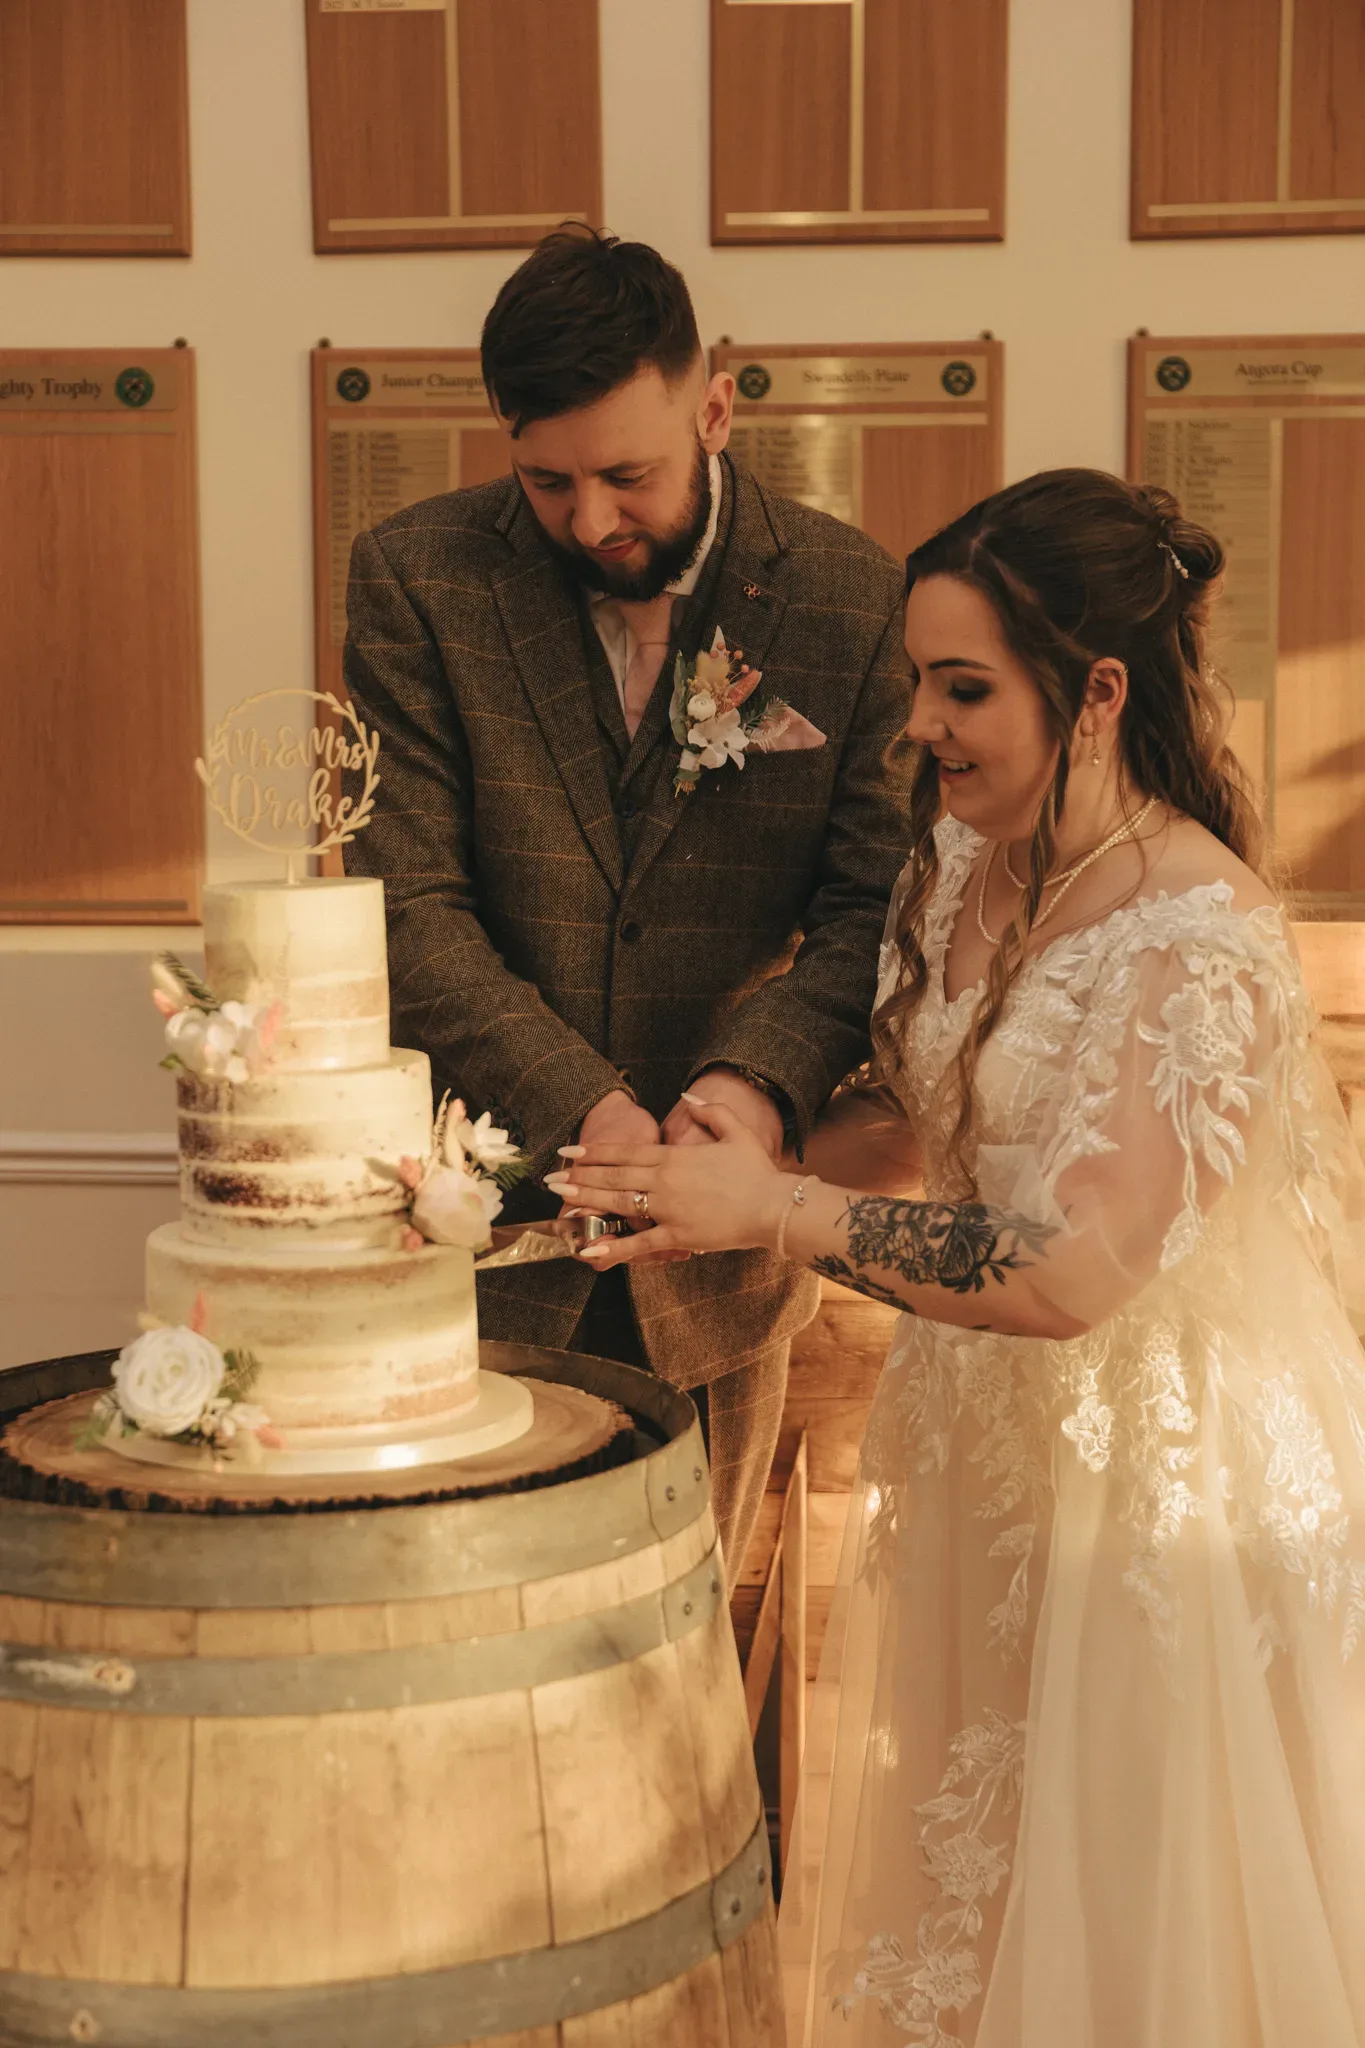 A bride and groom cut their wedding cake together. the bride, in a lace gown, and the groom, in a tweed suit, stand by a cake on a barrel in a warmly lit room. the cake adorned with flowers.